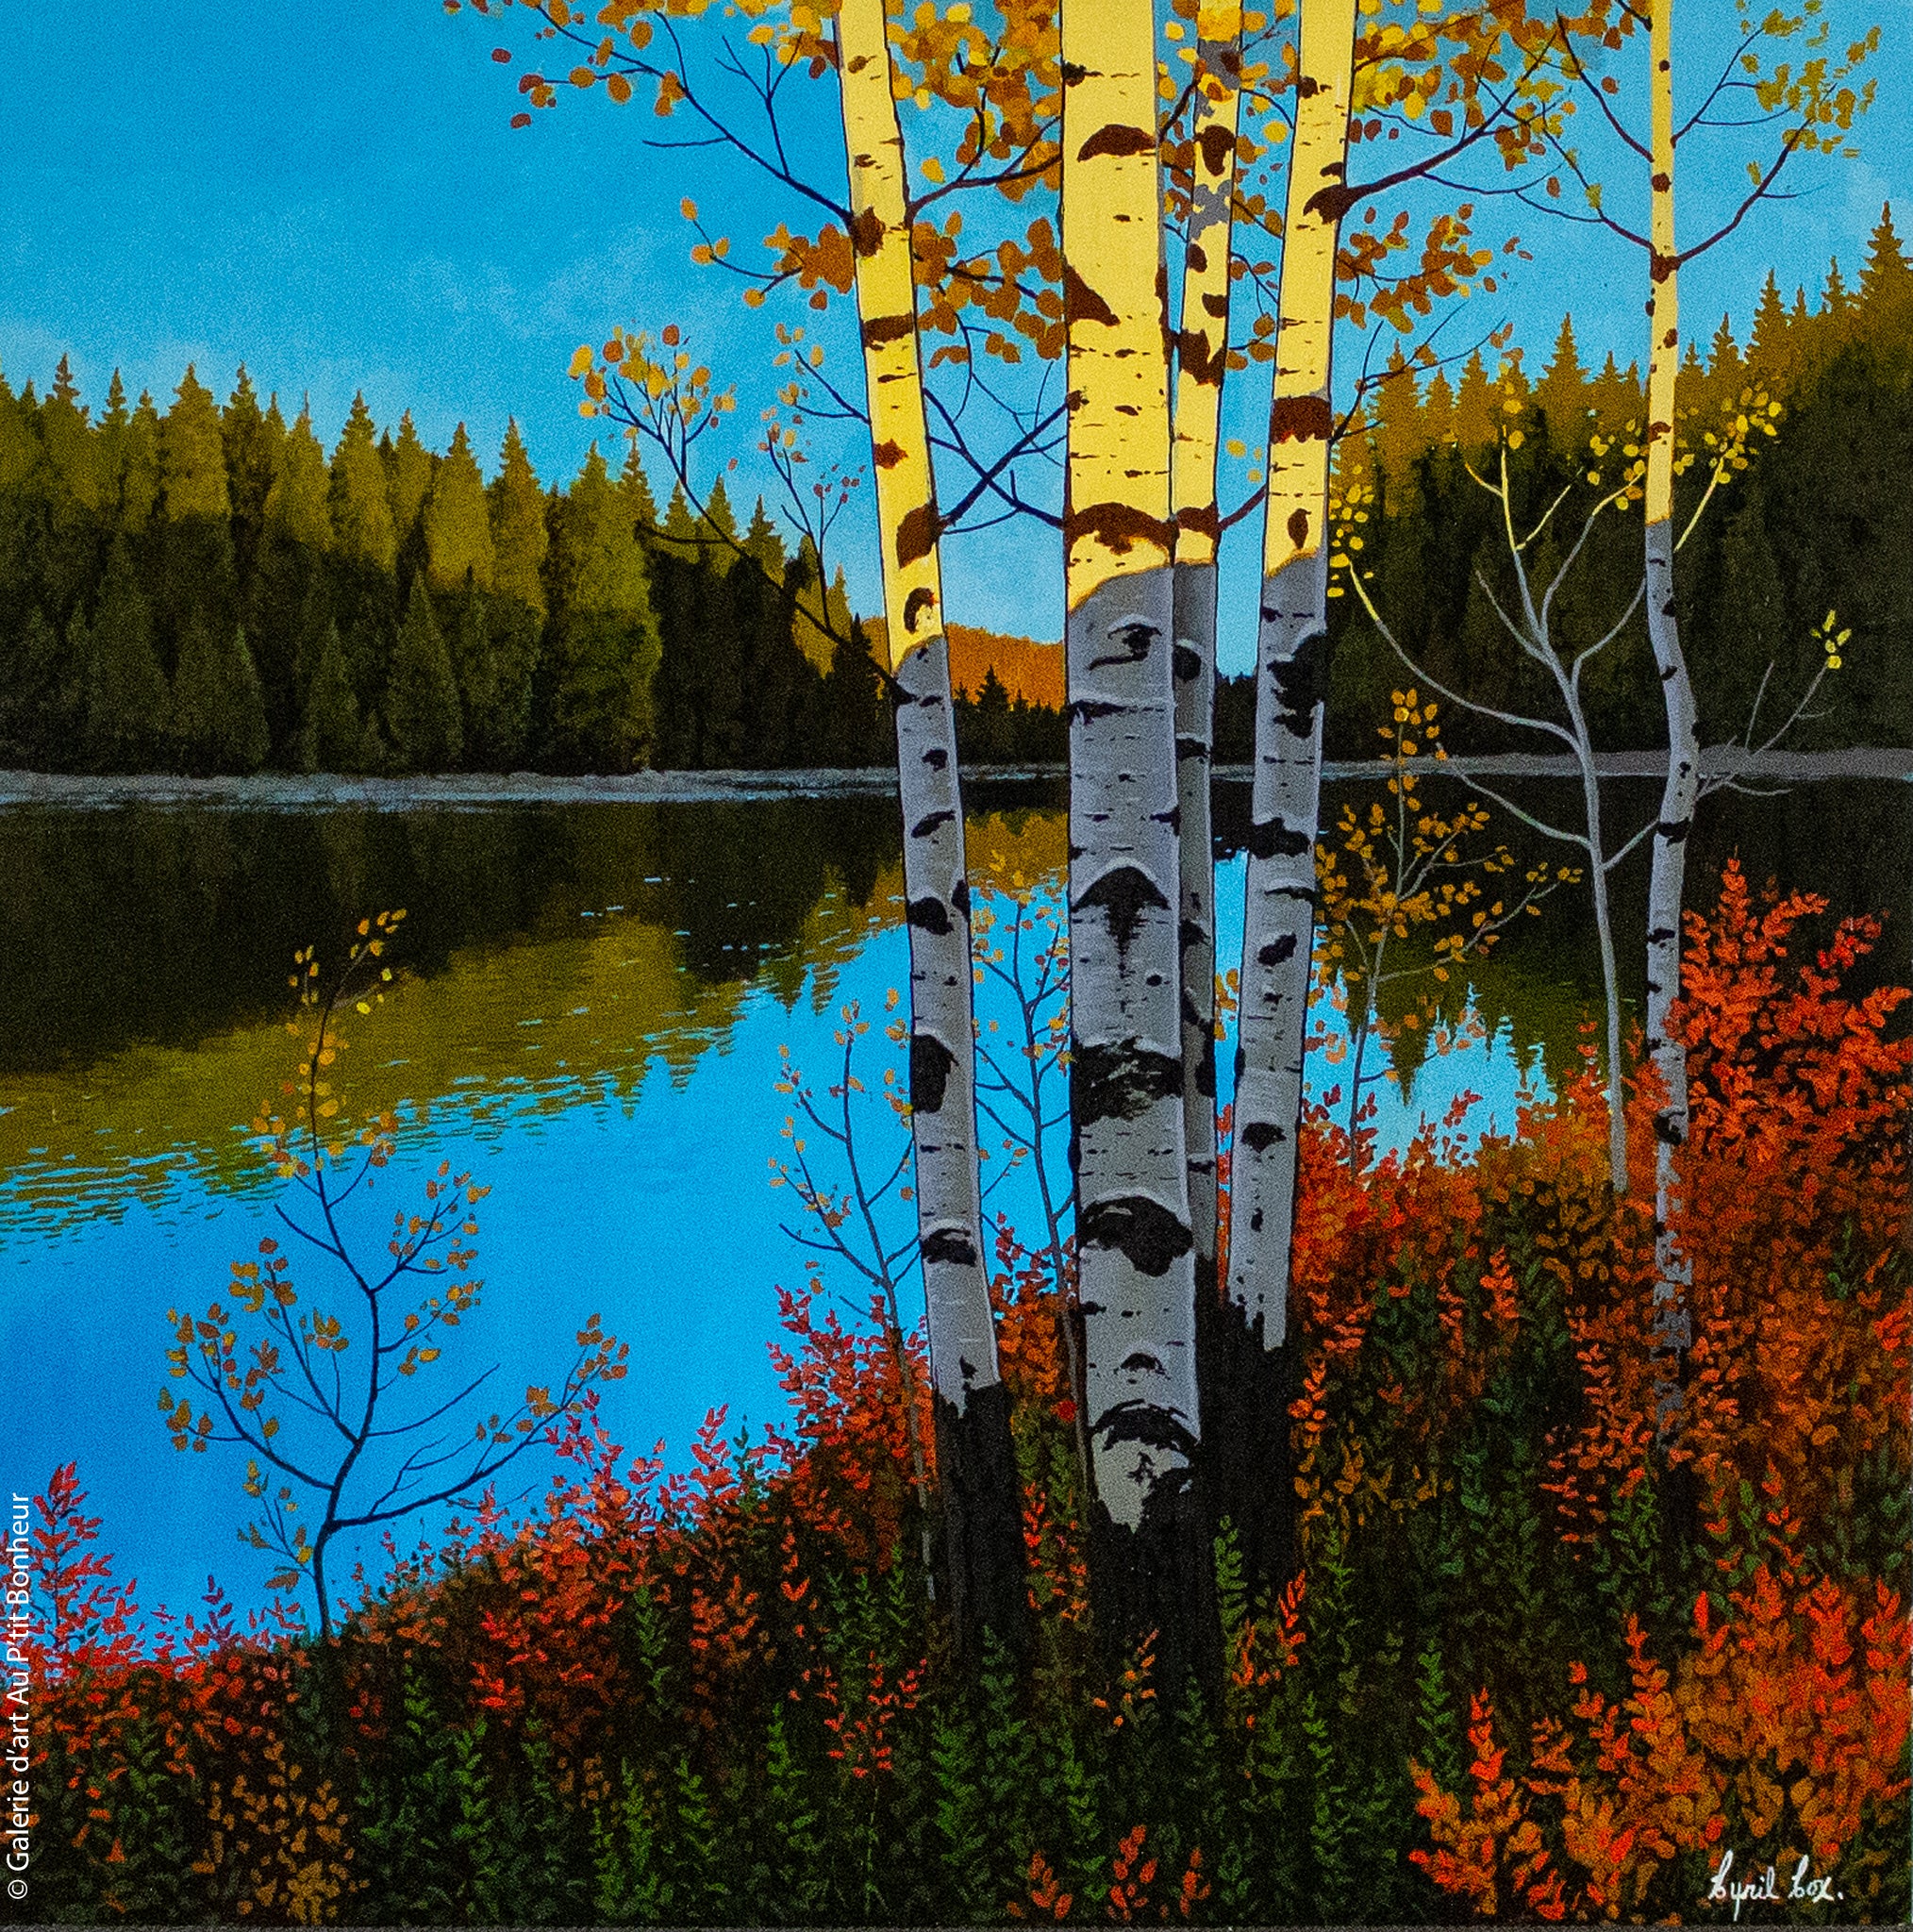 Cyril Cox | End of the Day, Aspens